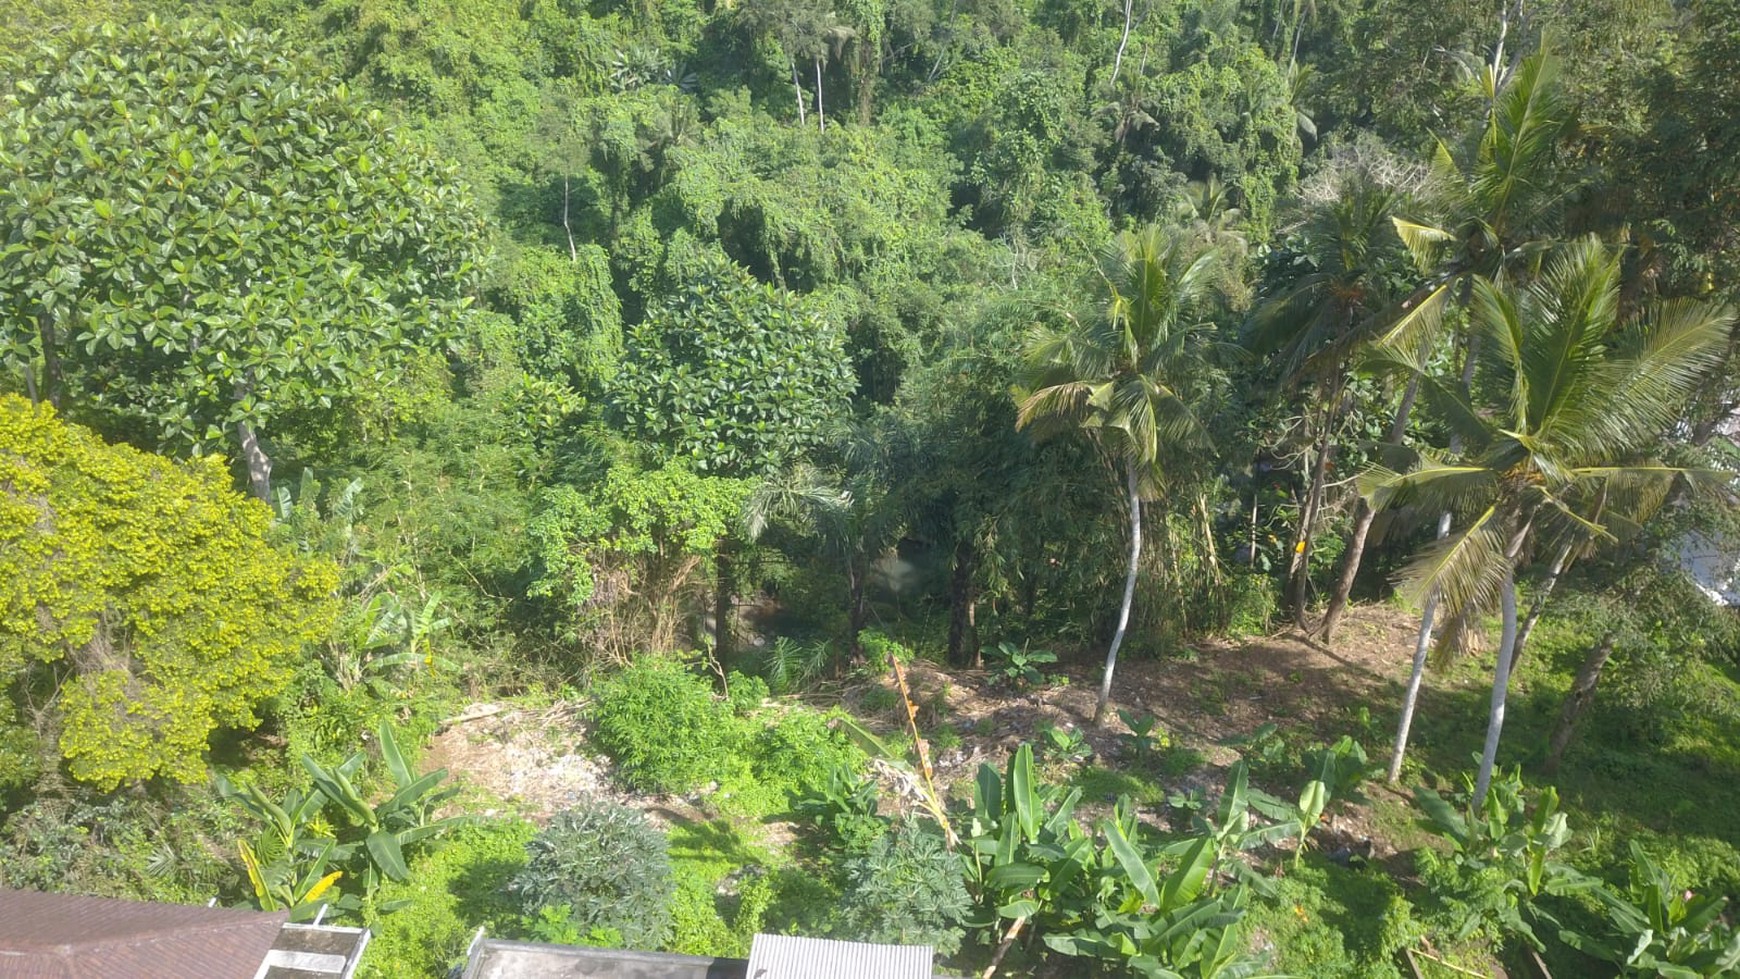 3,260 sq m of Freehold Land with Stunning River and Valley Views Located 6 Minutes from Ubud Palace